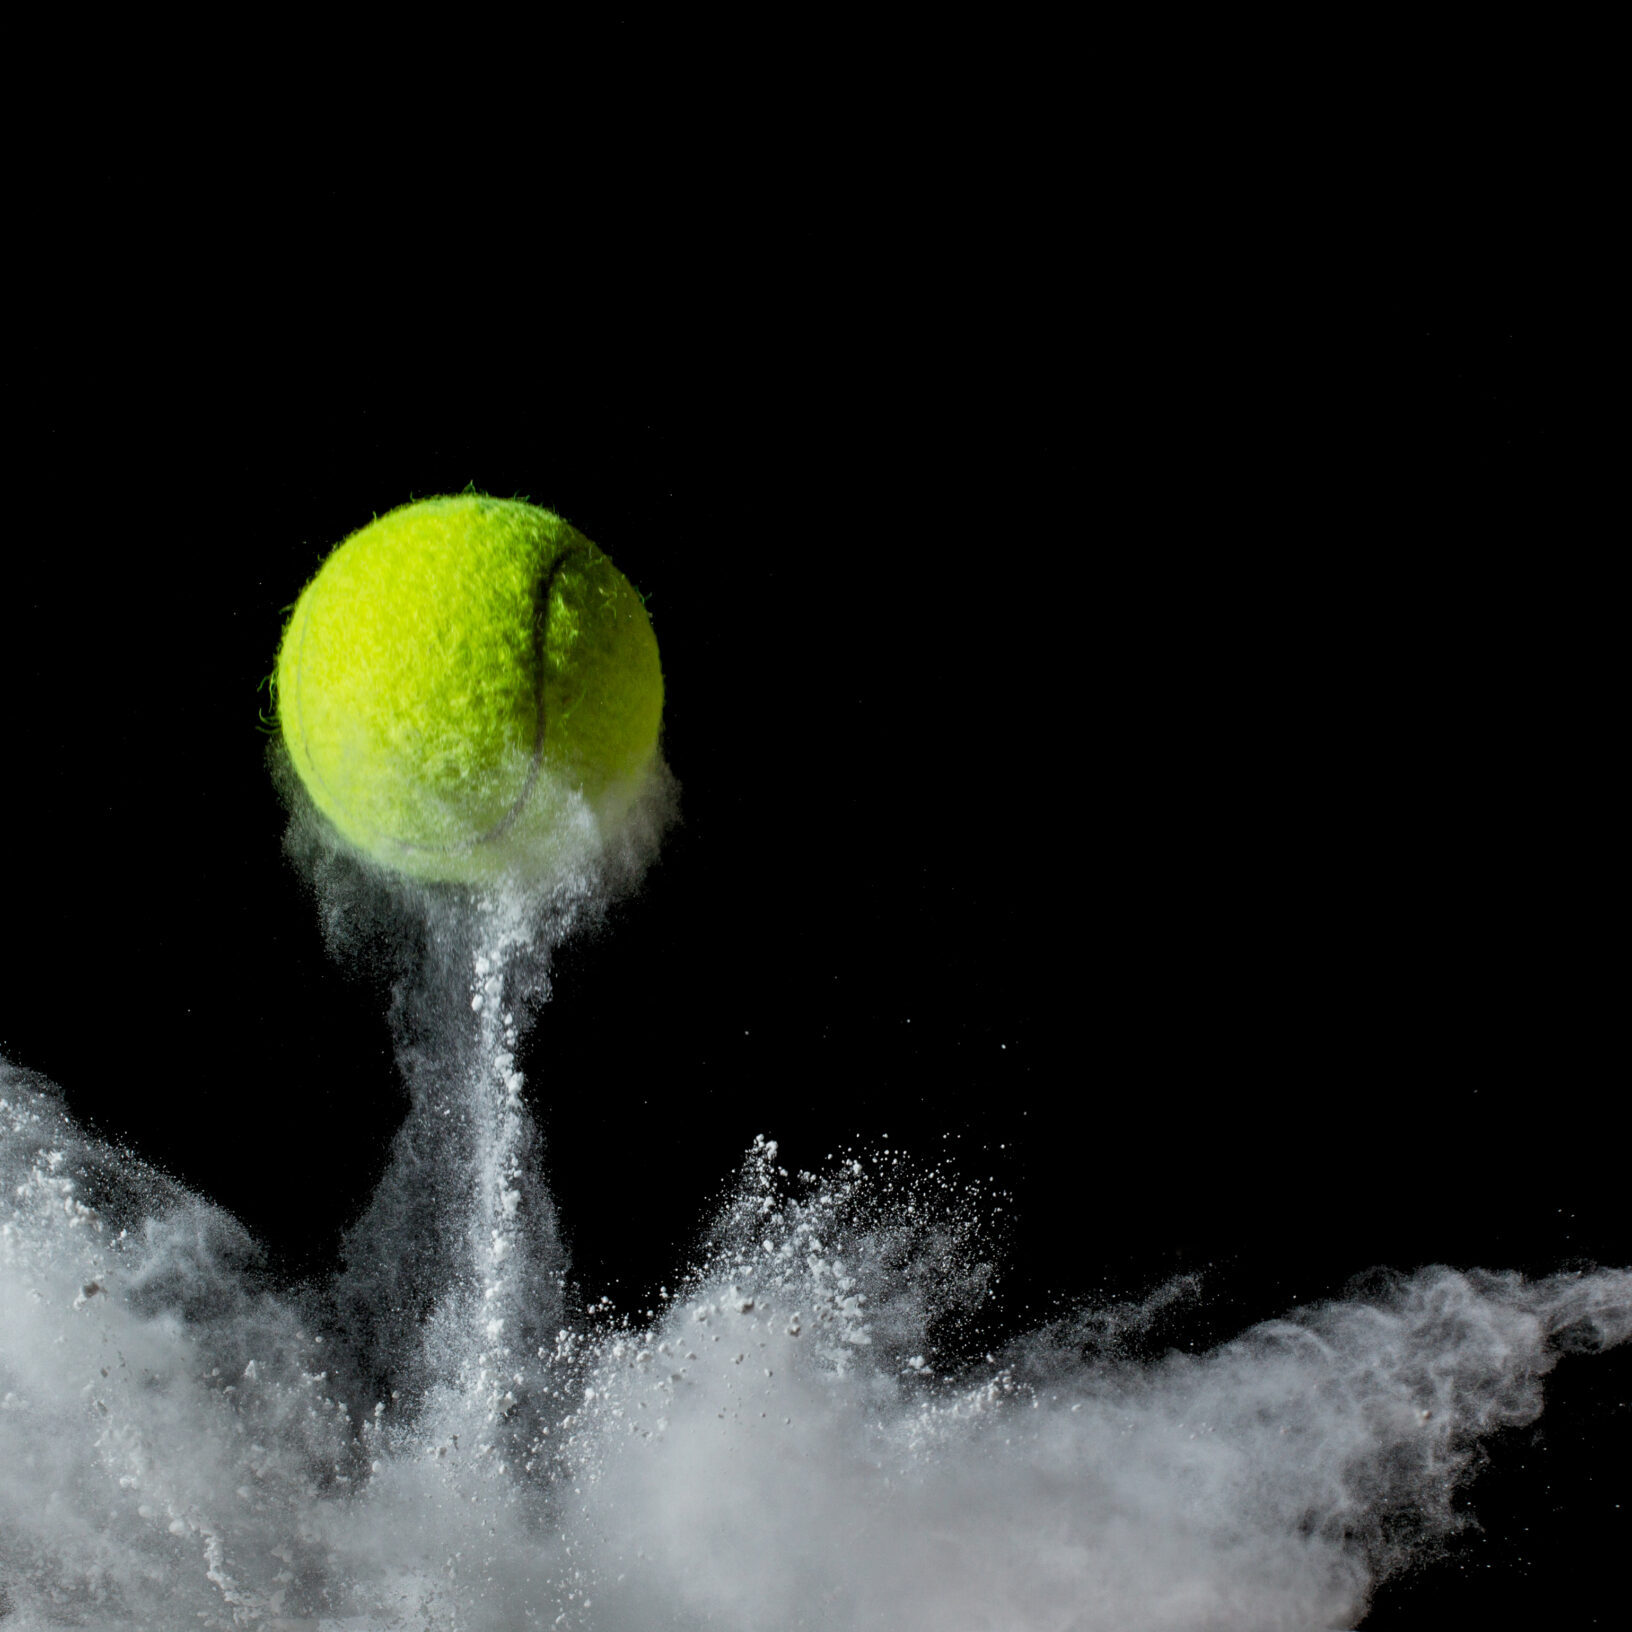 Our Elastic Business Consulting Service represented by a Bouncing Tennis Ball